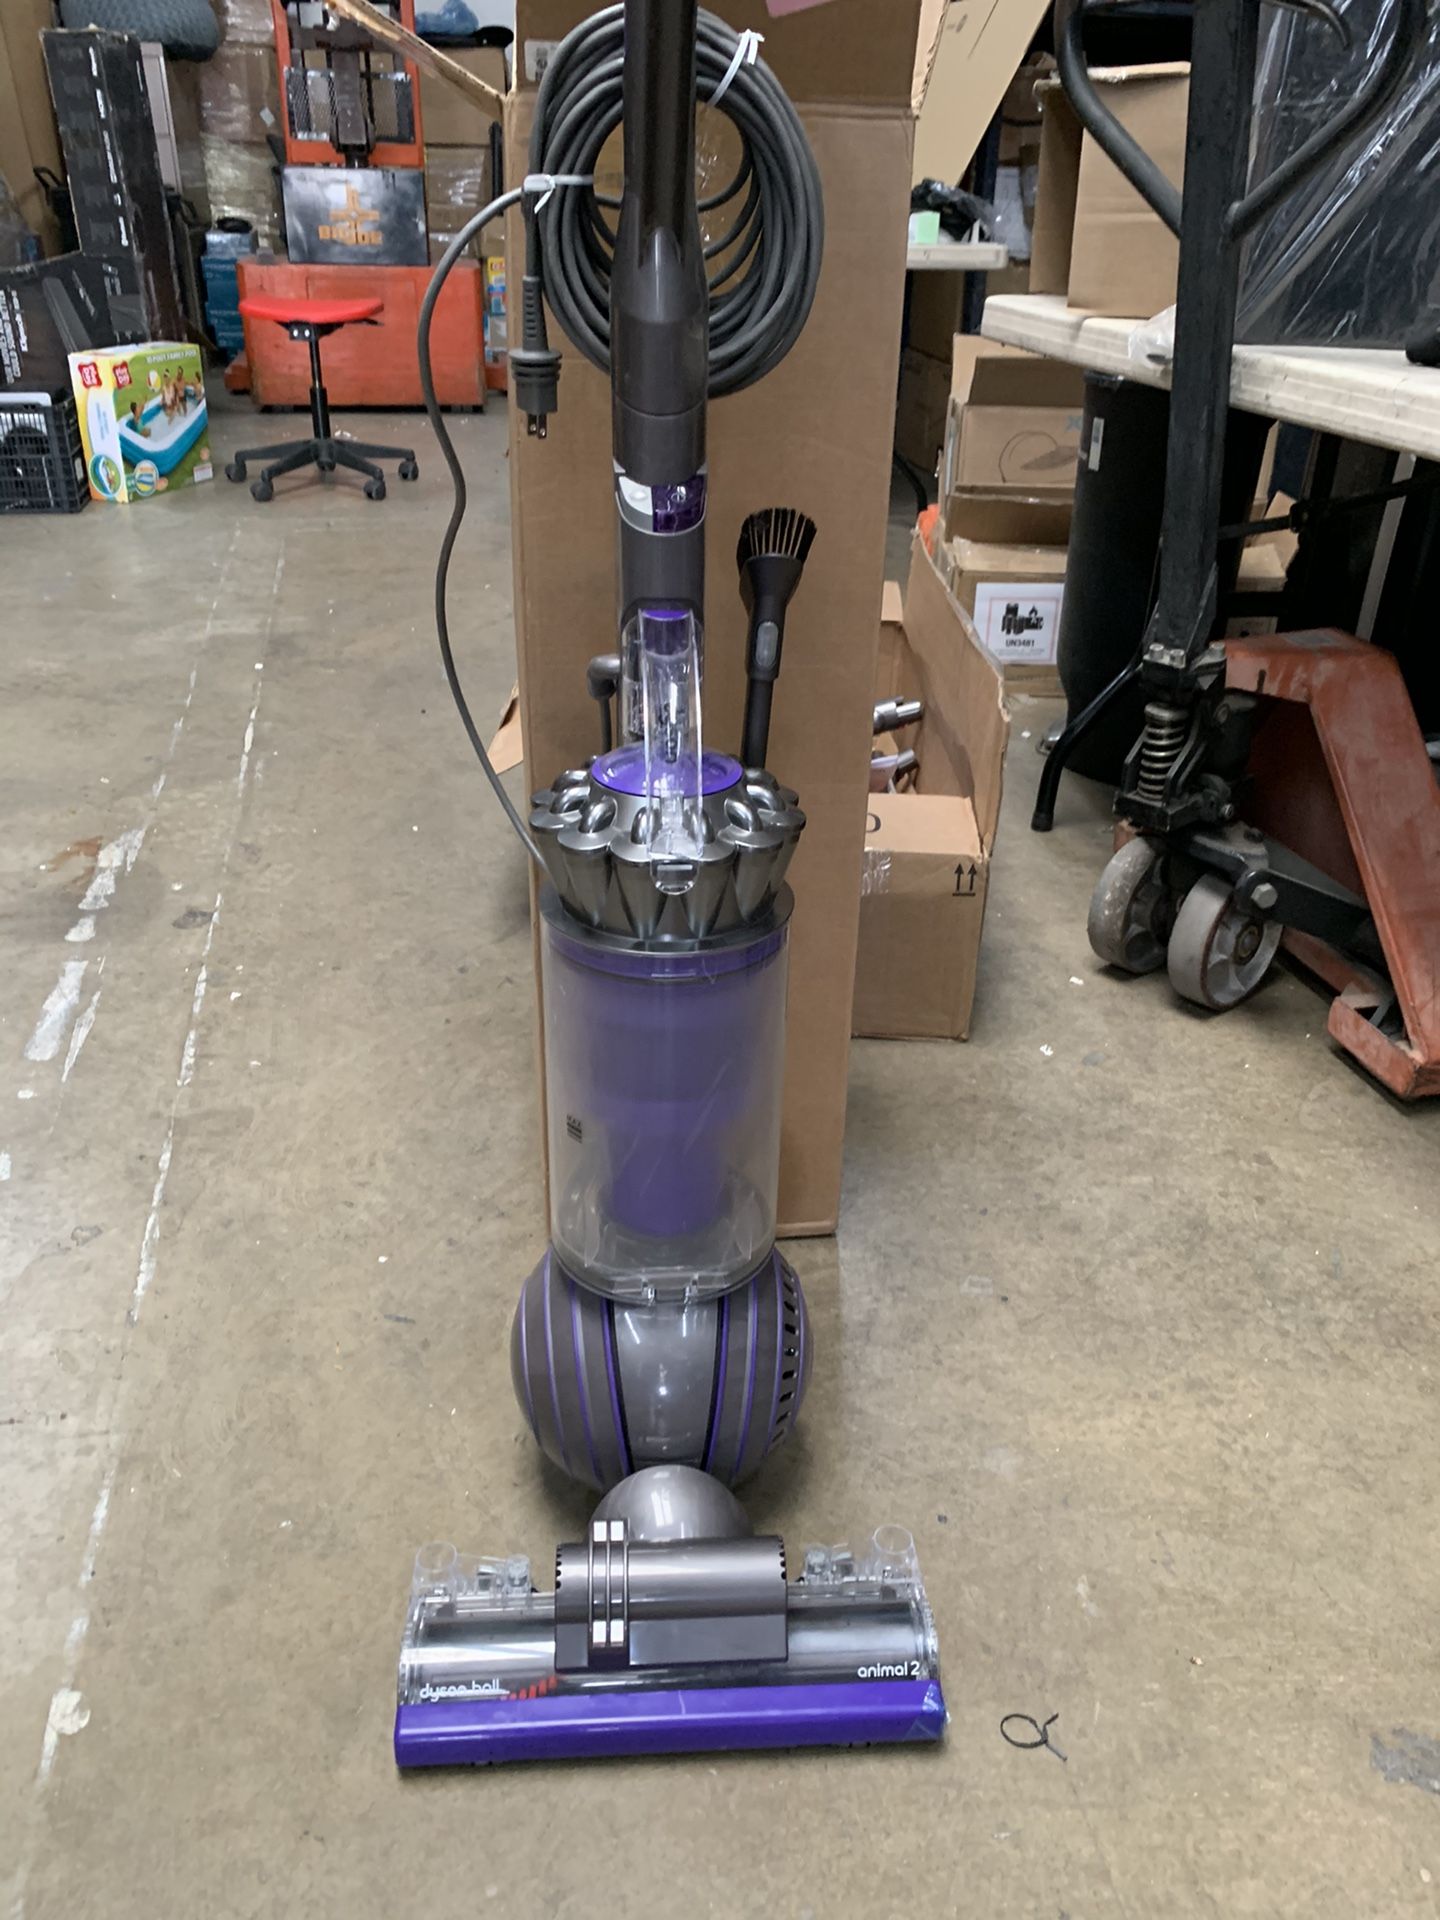 Dyson UP20 Ball Animal 2 Upright Vacuum Cleaner